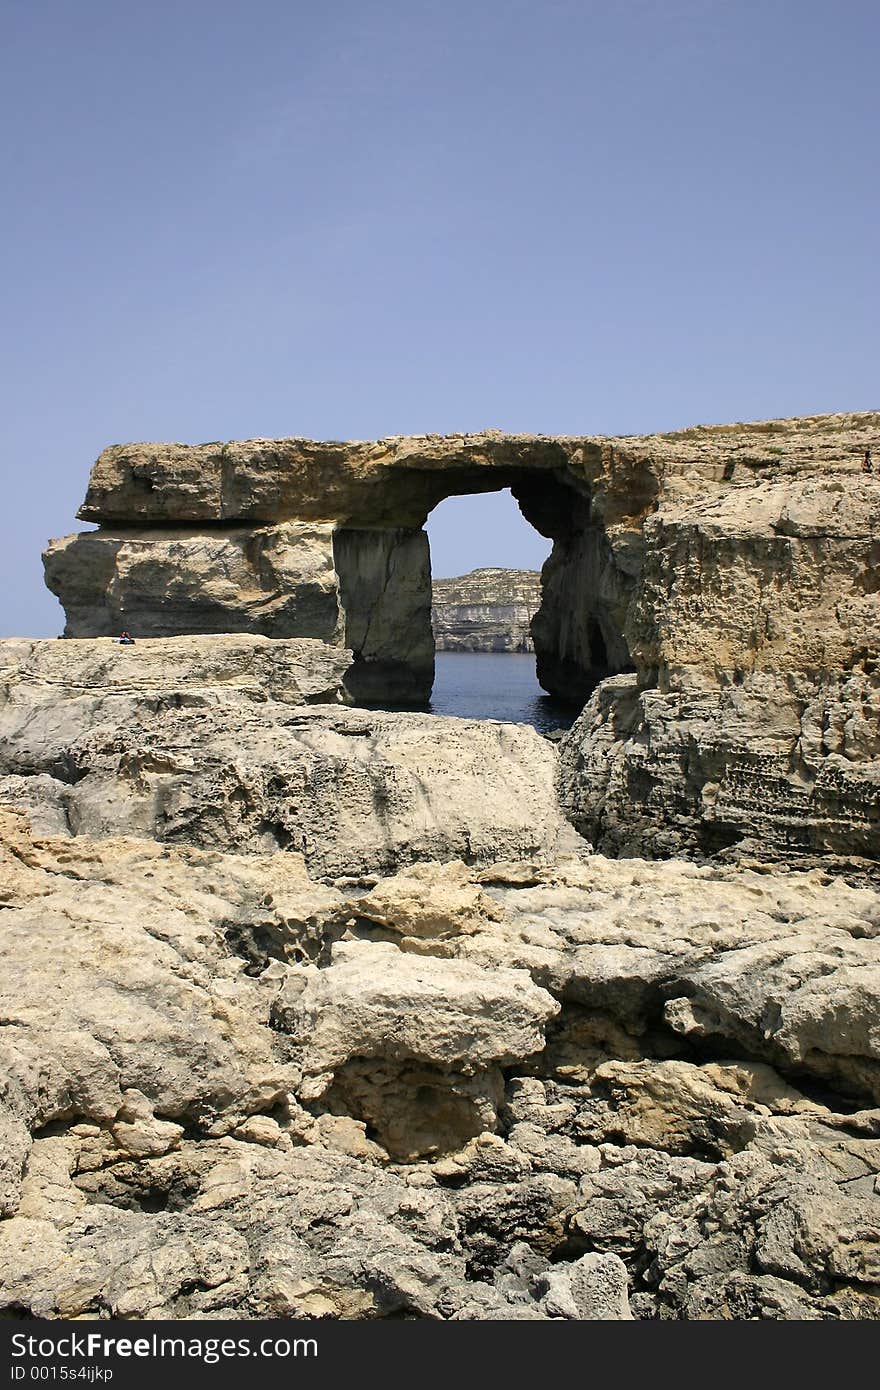 Huge rock formations at Dwejra, Gozo, Malta. This naturally cut window is better known as the Azure Window. Huge rock formations at Dwejra, Gozo, Malta. This naturally cut window is better known as the Azure Window.